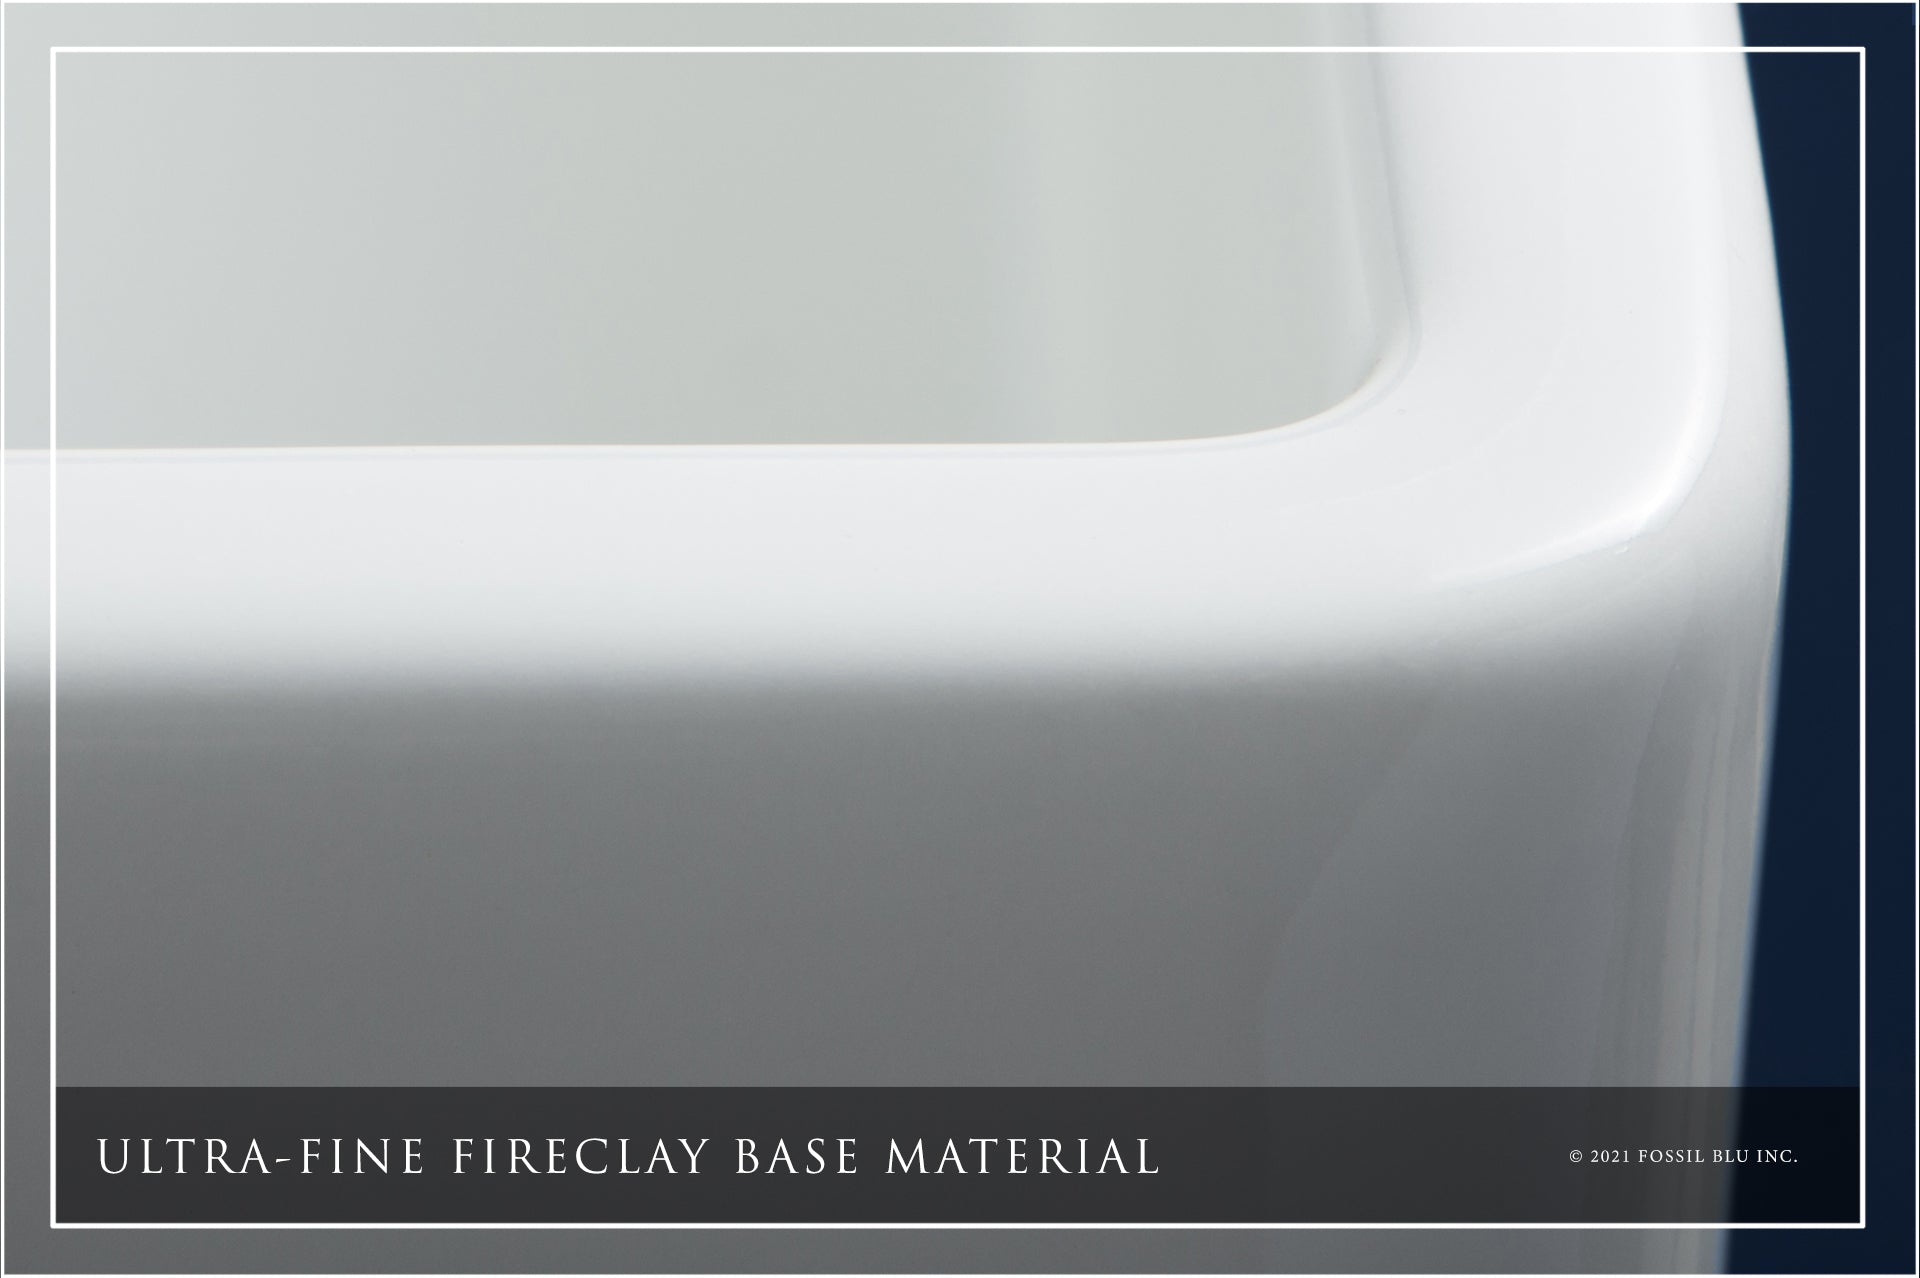 FSW1010 LUXURY 26-INCH SOLID FIRECLAY FARMHOUSE SINK IN WHITE, STAINLESS STEEL ACCS, BELTED FRONT